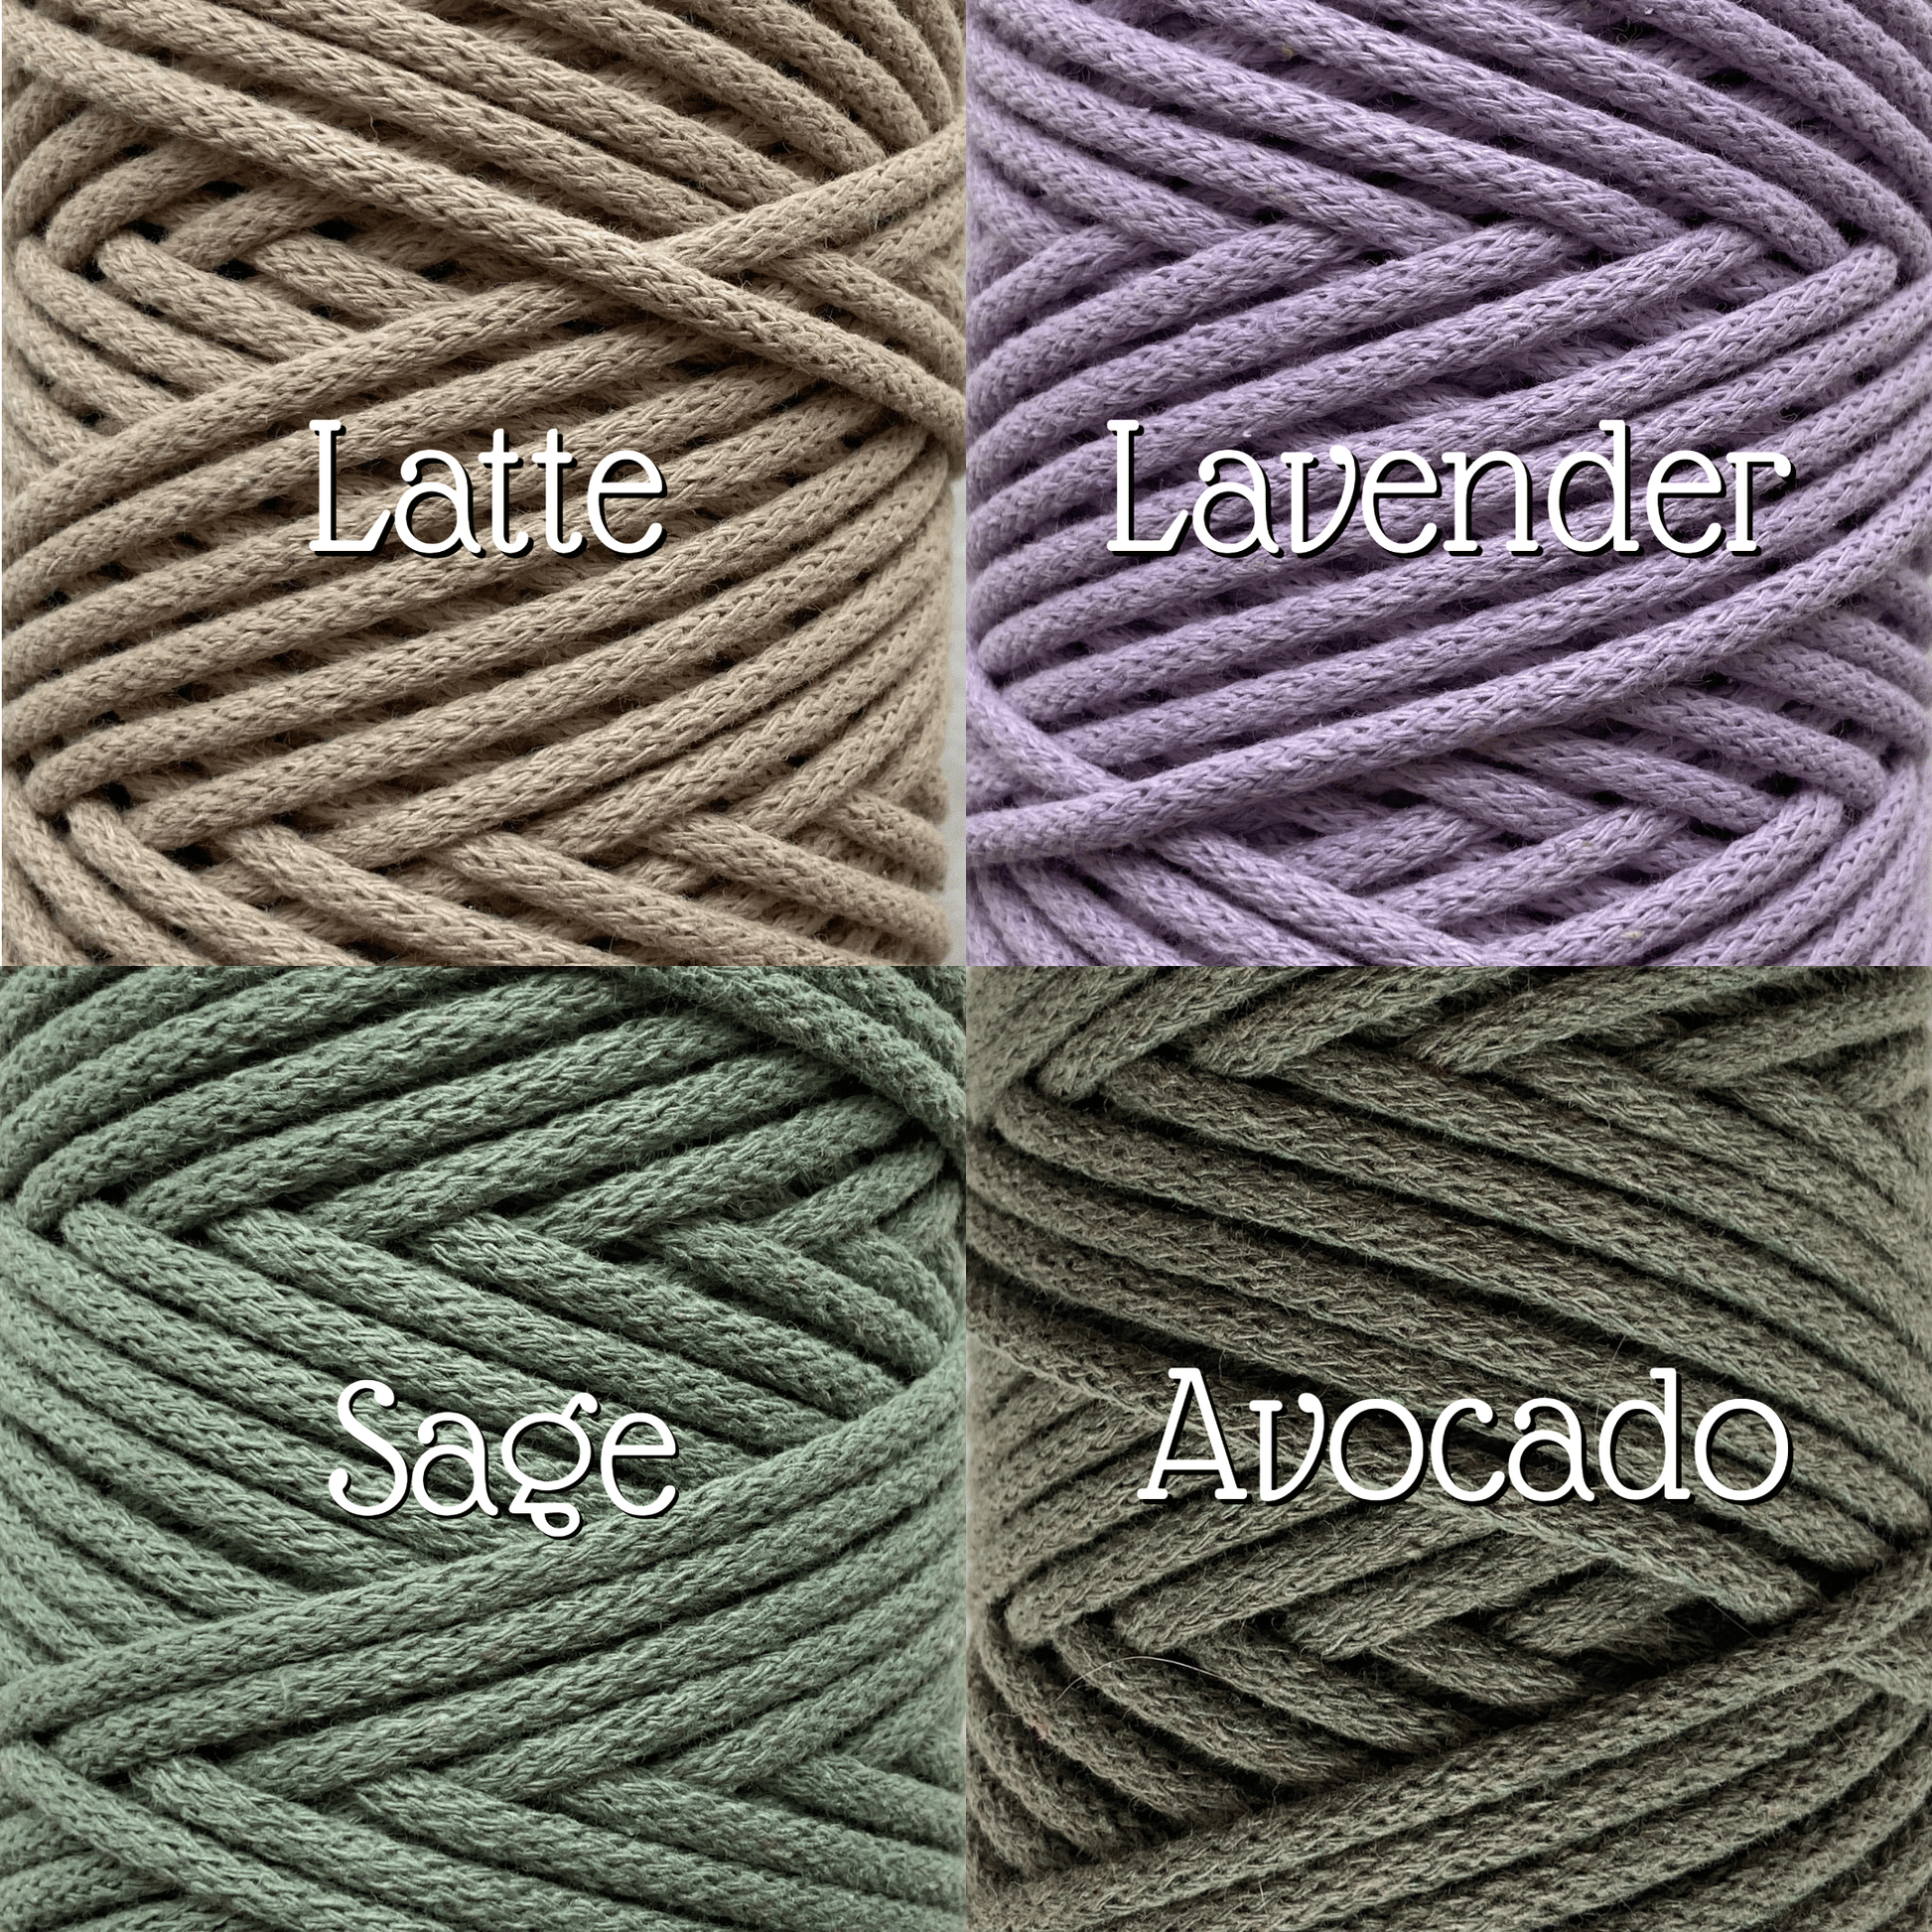 Macrame Cord, 5mm Crochet Cord, Knitting Rope, Yarn Supplies, Rope Cord,  Craft Cord, Crochet Yarn, Crochet Rope, Yarn Rope, Polyester Rope 